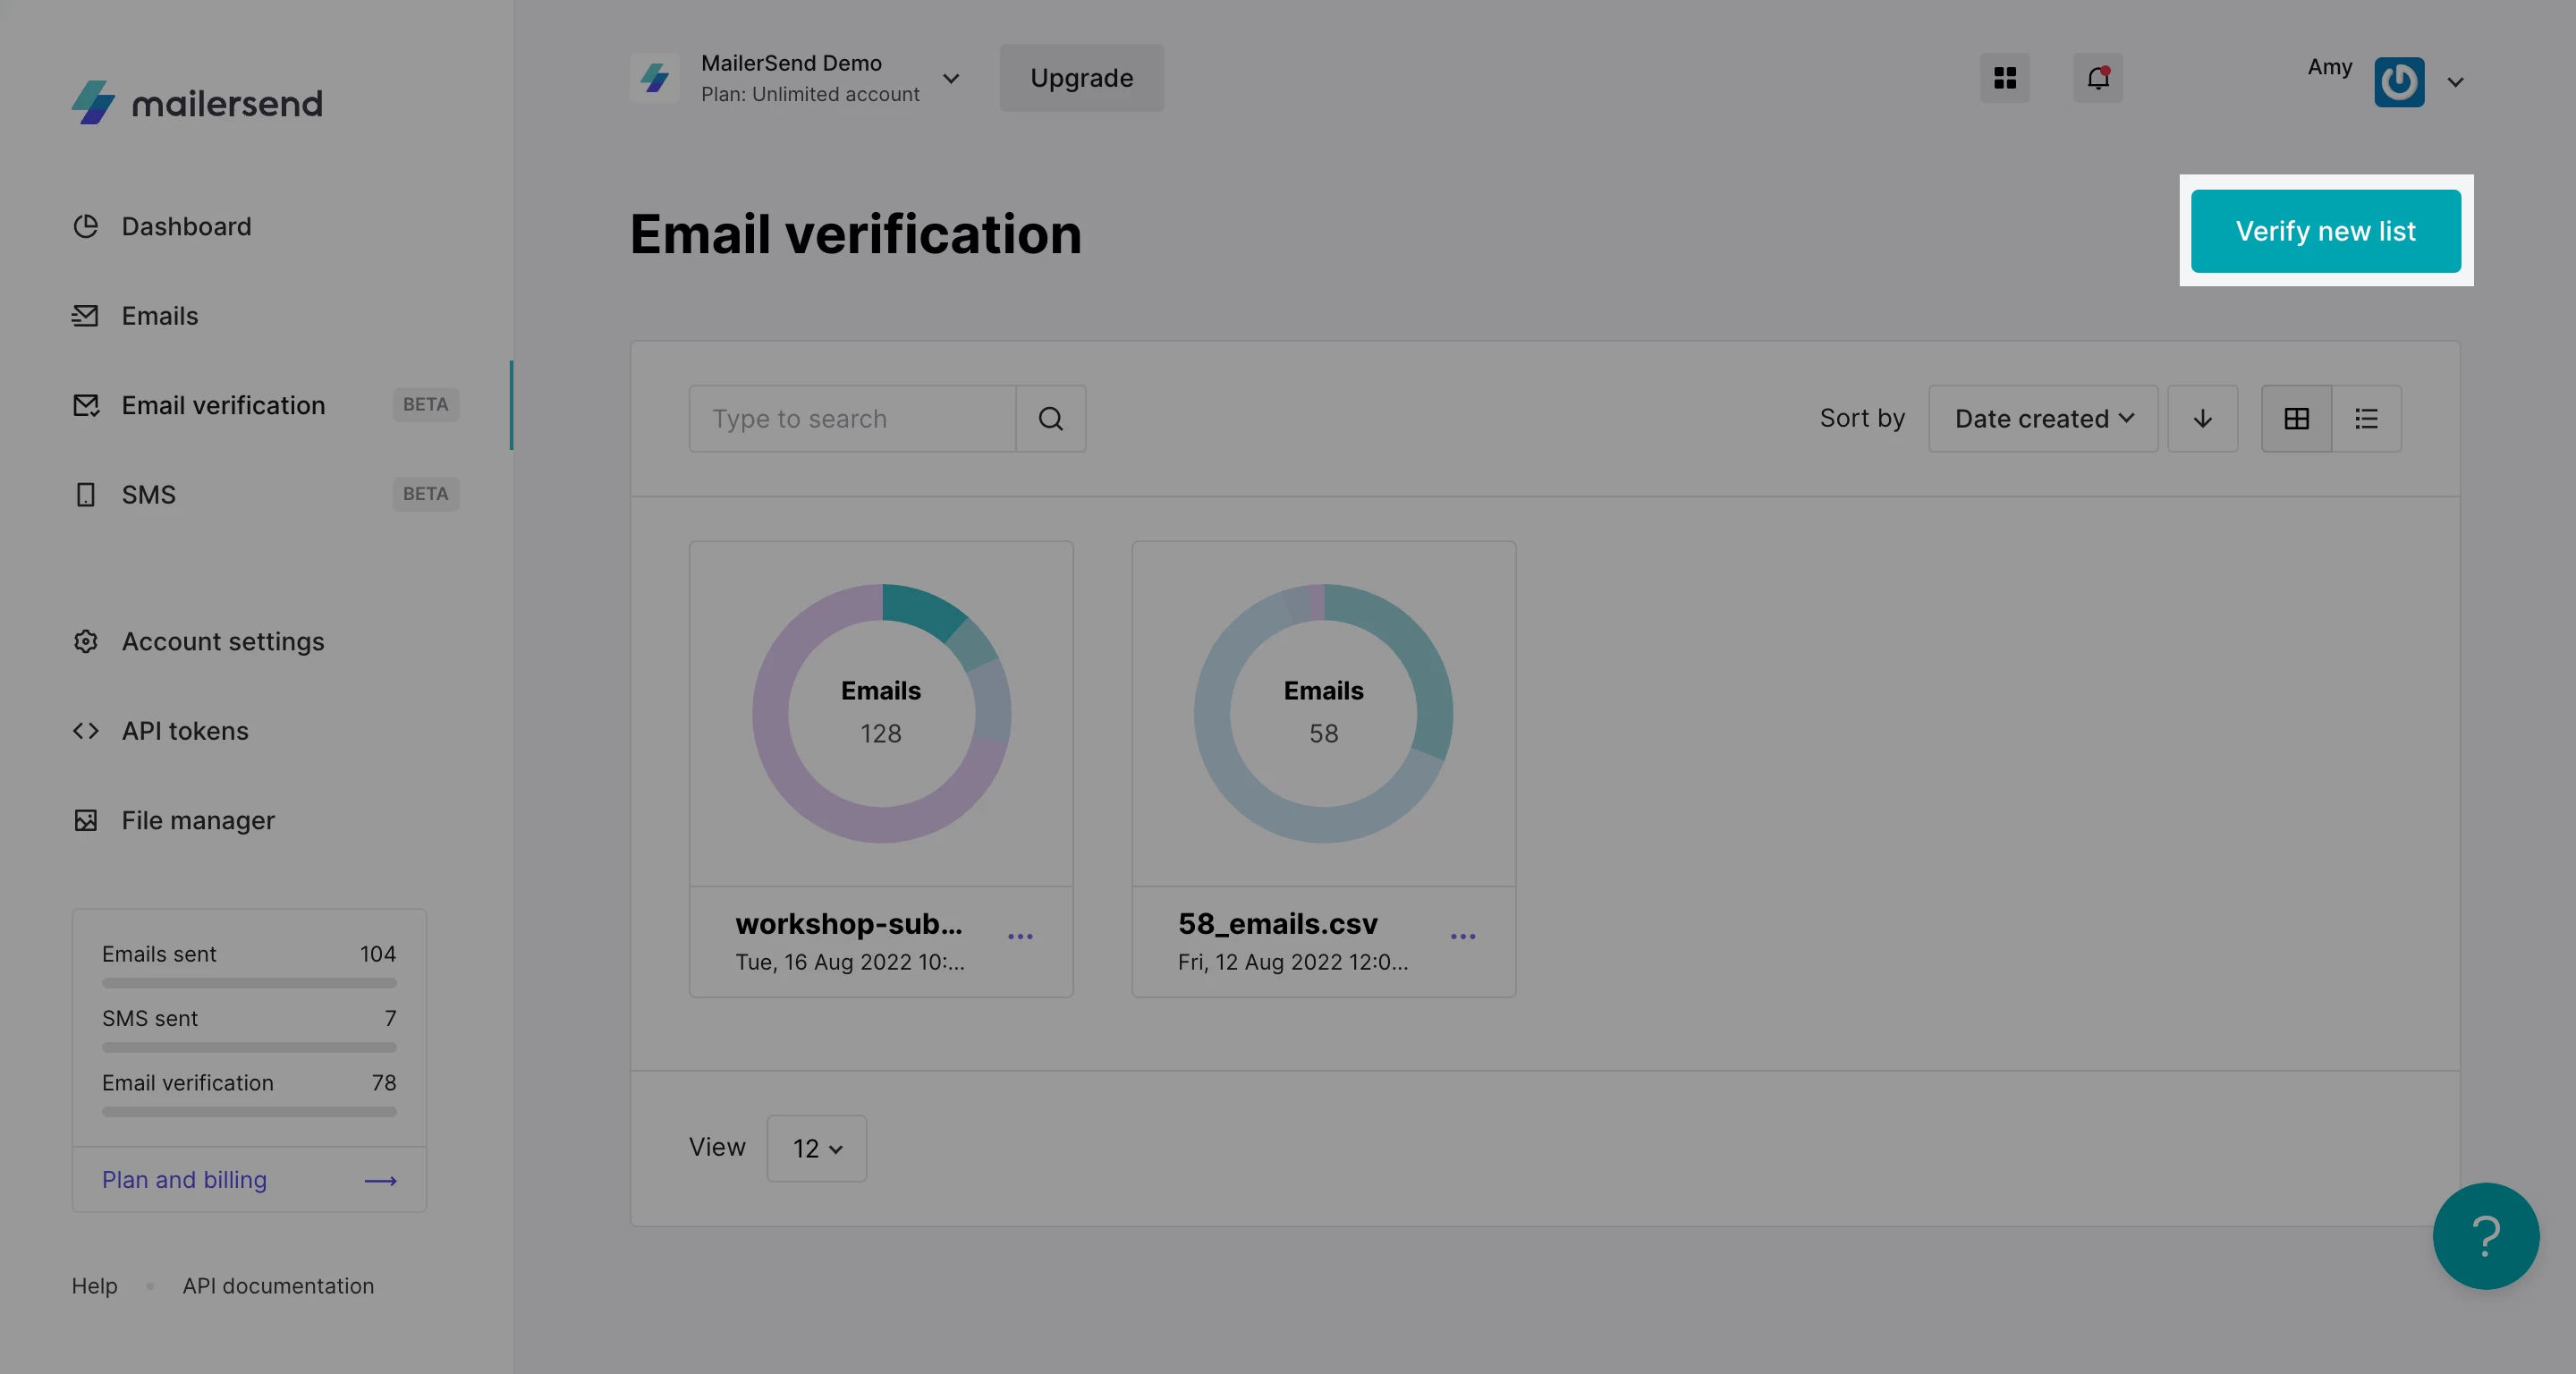 A view of the Email verification page in MailerSend with the Verify new list button highlighted.